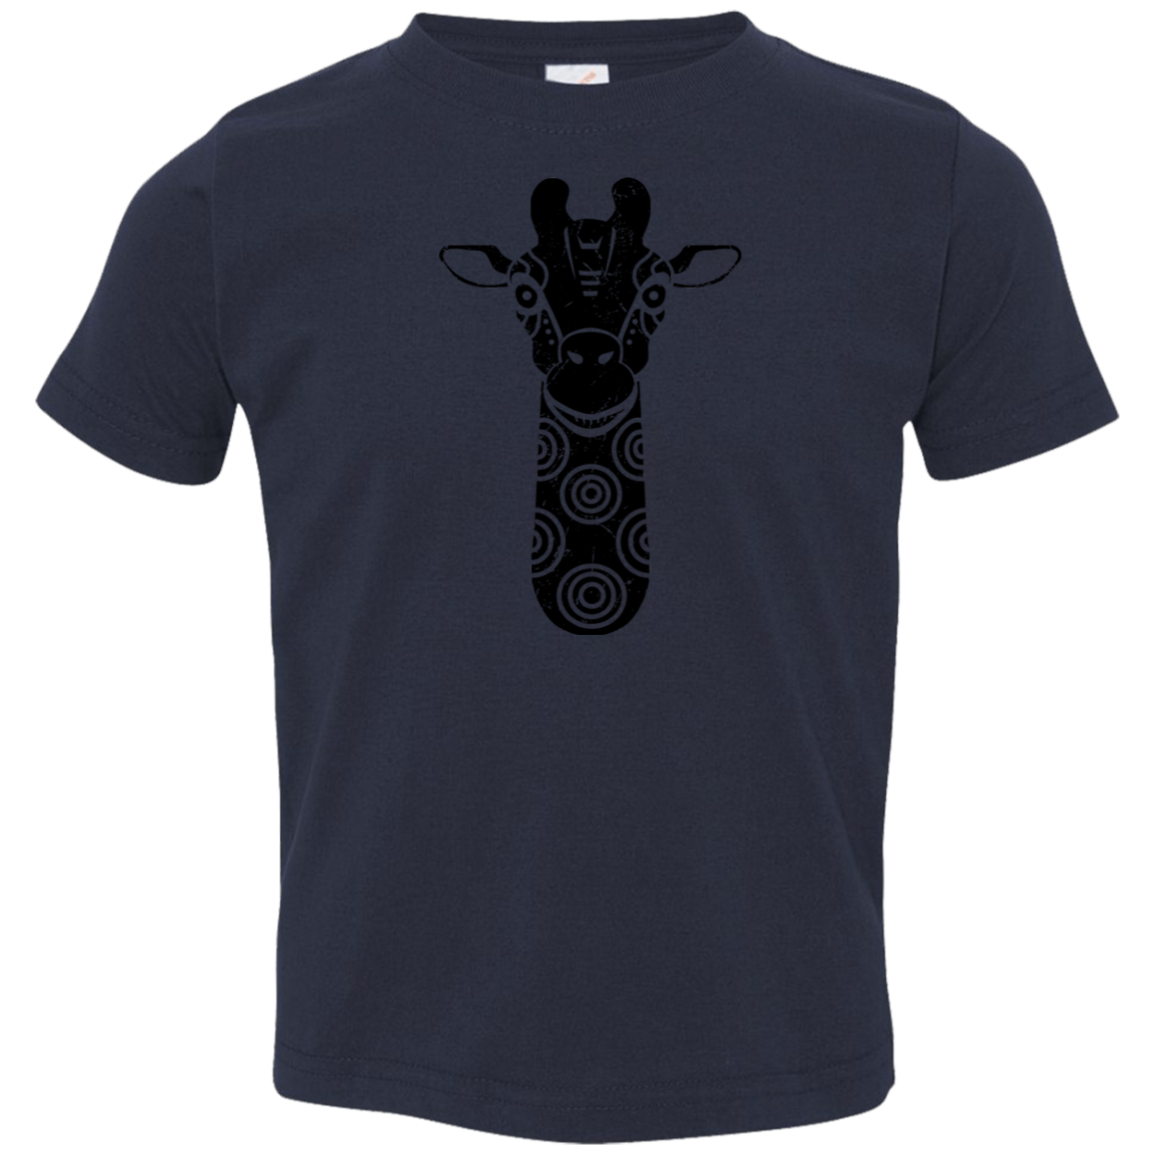 Black Distressed Emblem T-Shirt for Toddlers (Giraffe/Archie)